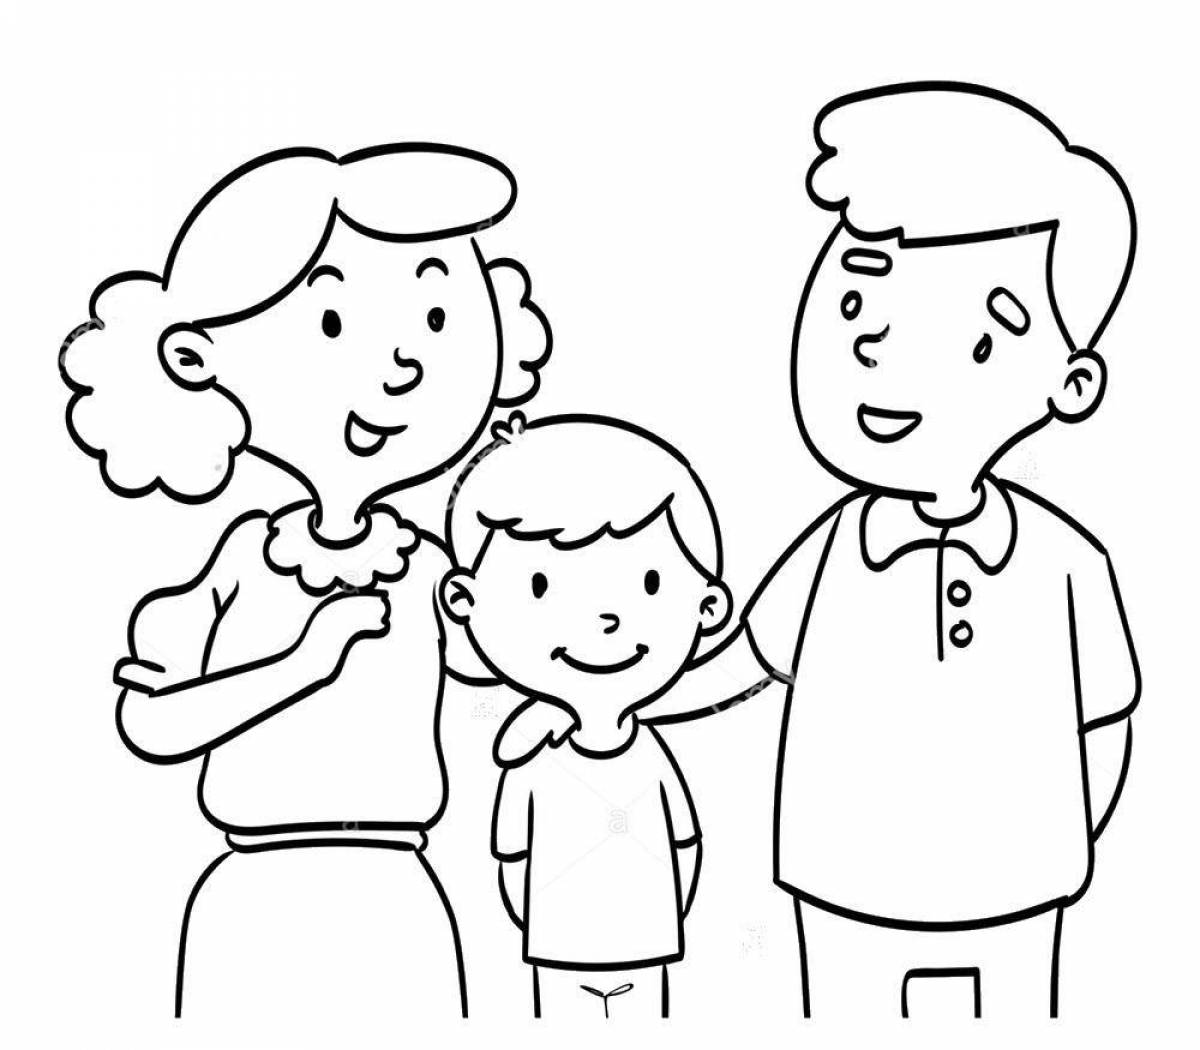 Fun coloring pages for dad and daughter